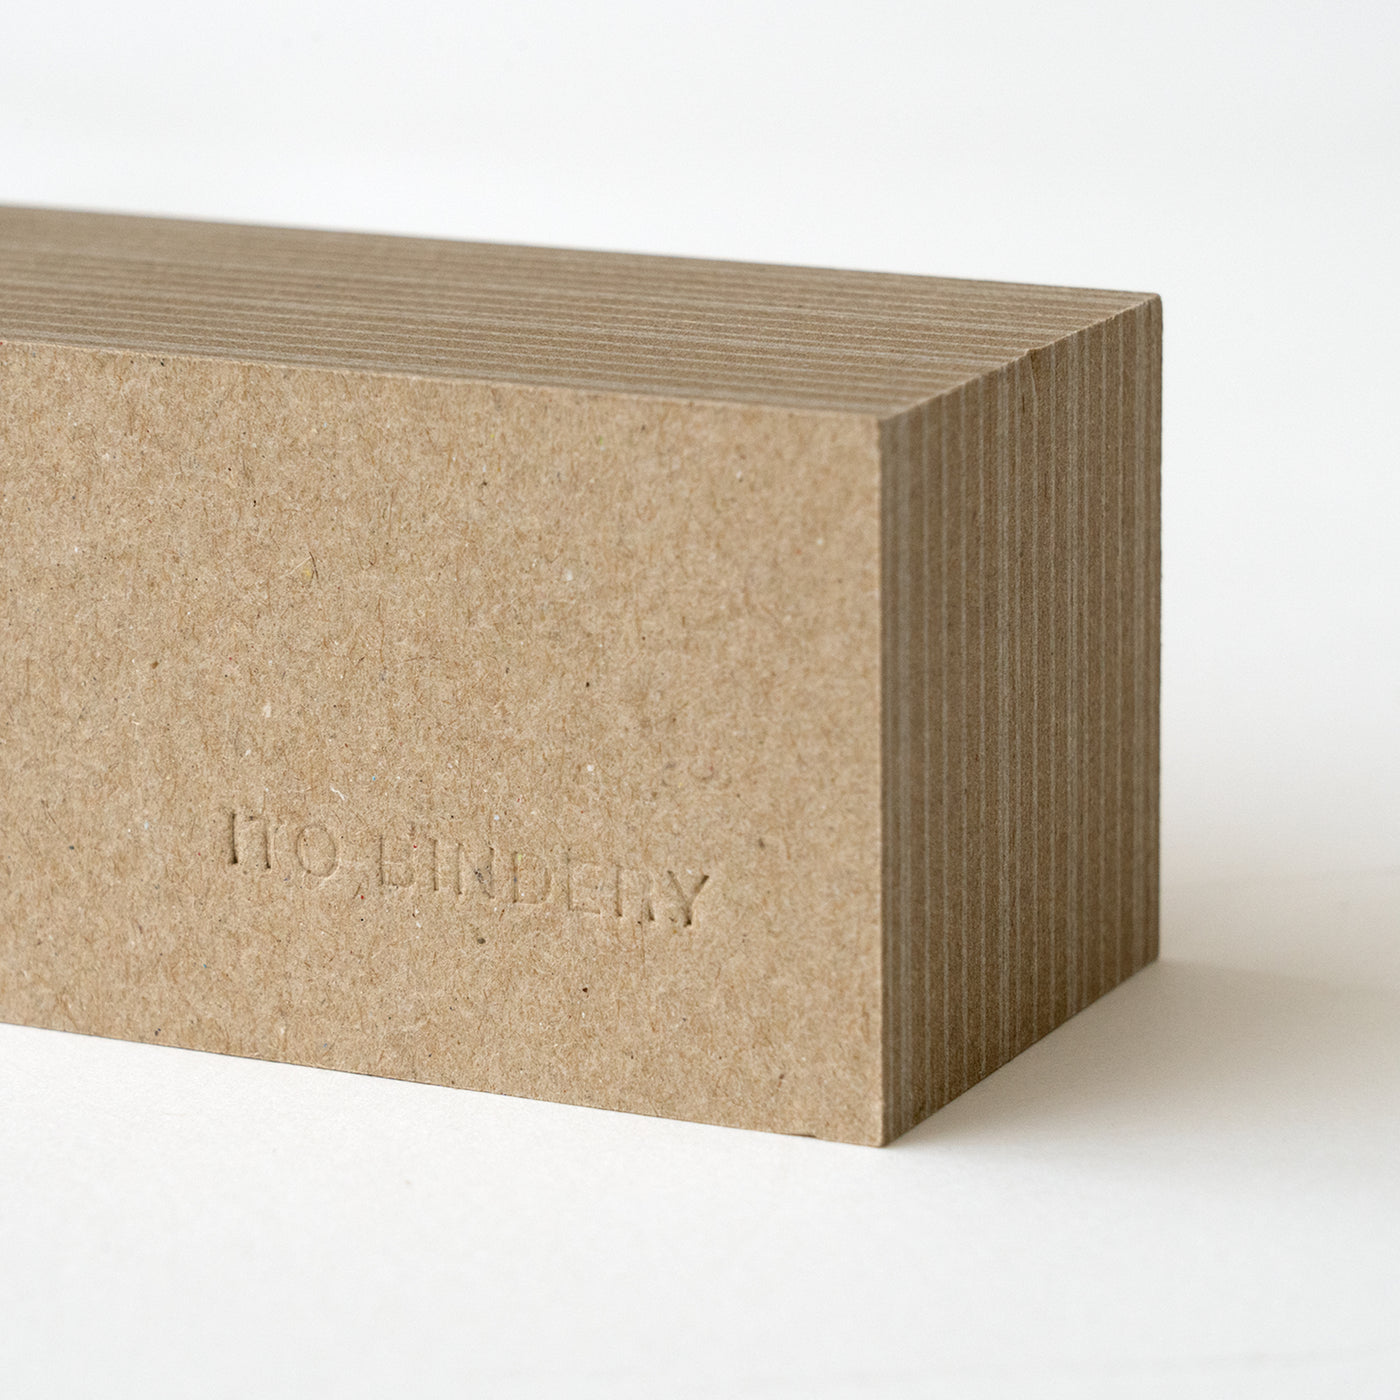 ITO BINDERY / PENCIL STAND